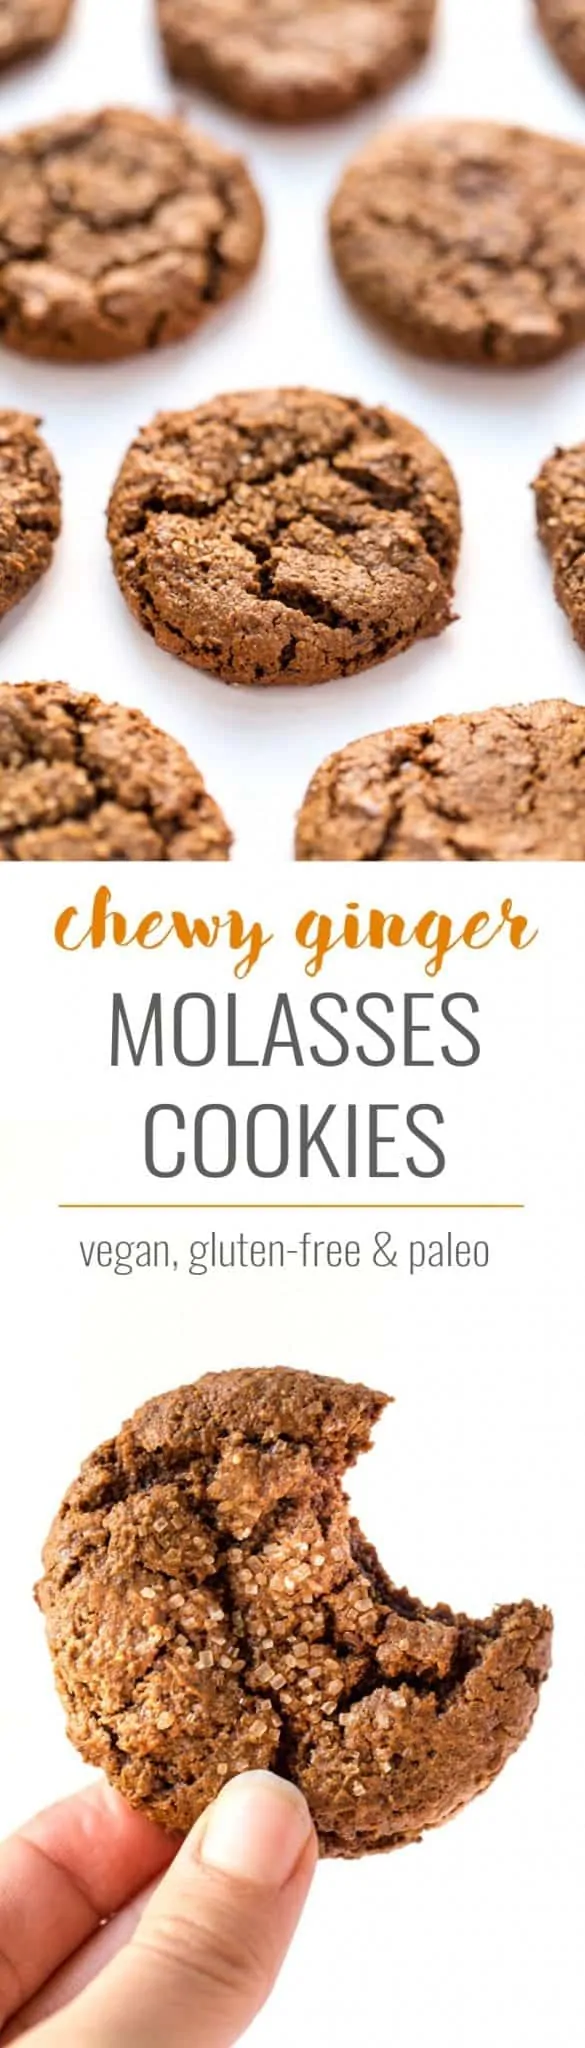 These CHEWY & HEALTHY Ginger Molasses Cookies are perfect for the holidays! Gluten-free, grain-free, vegan & paleo! #cookies #christmas